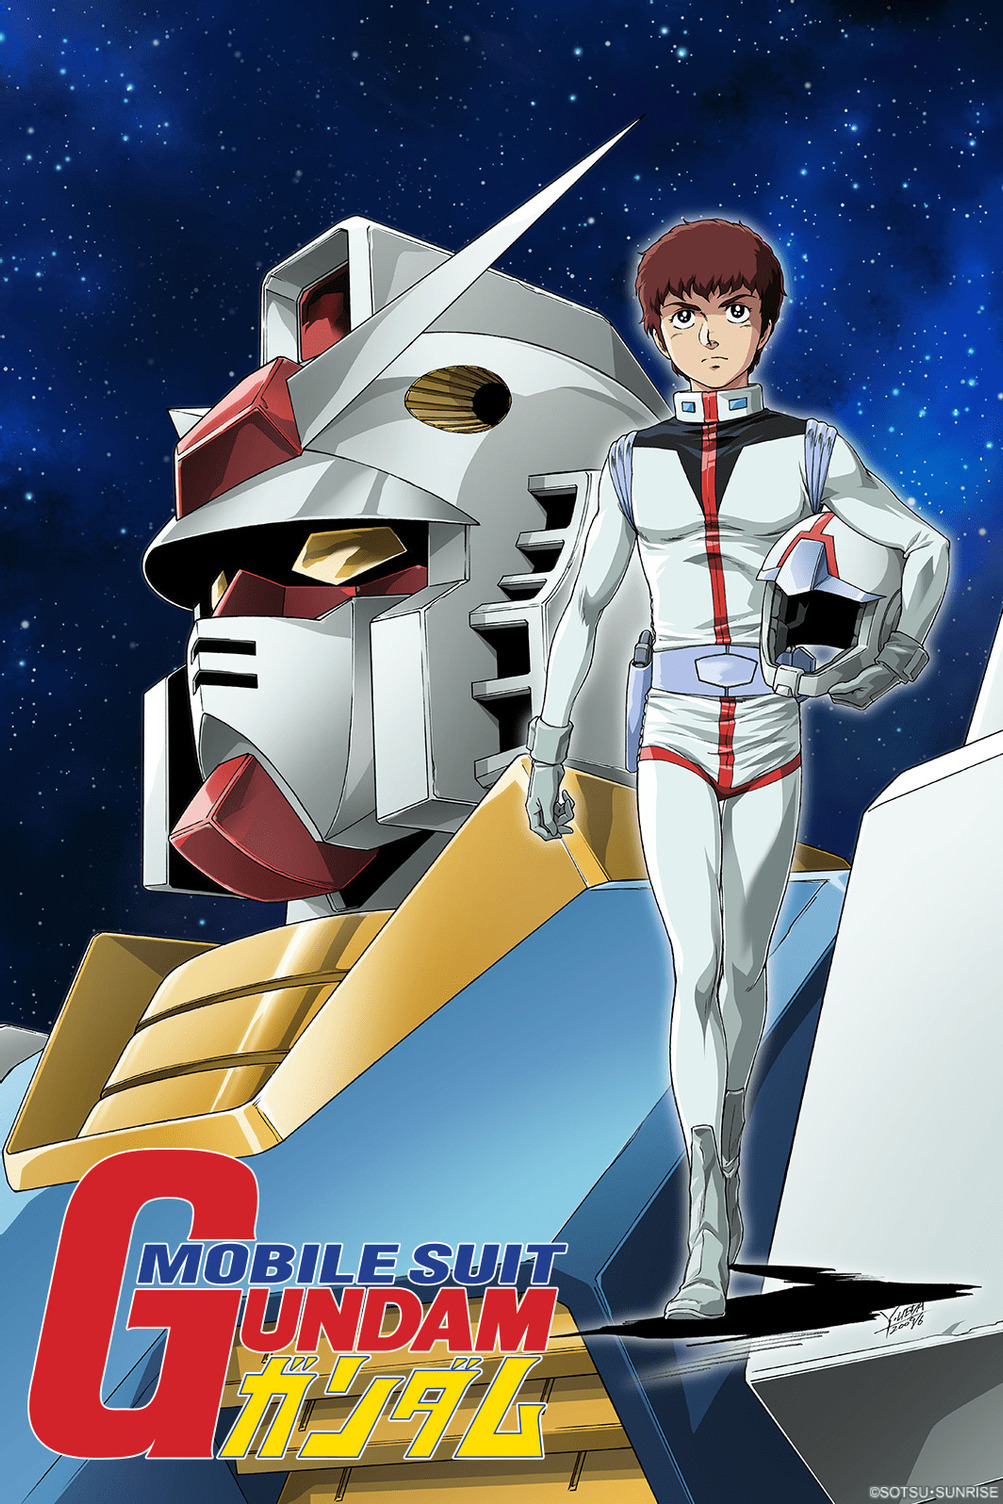 Crunchyroll - Mobile Suit Gundam Anime That Started It All Launches on  Crunchyroll